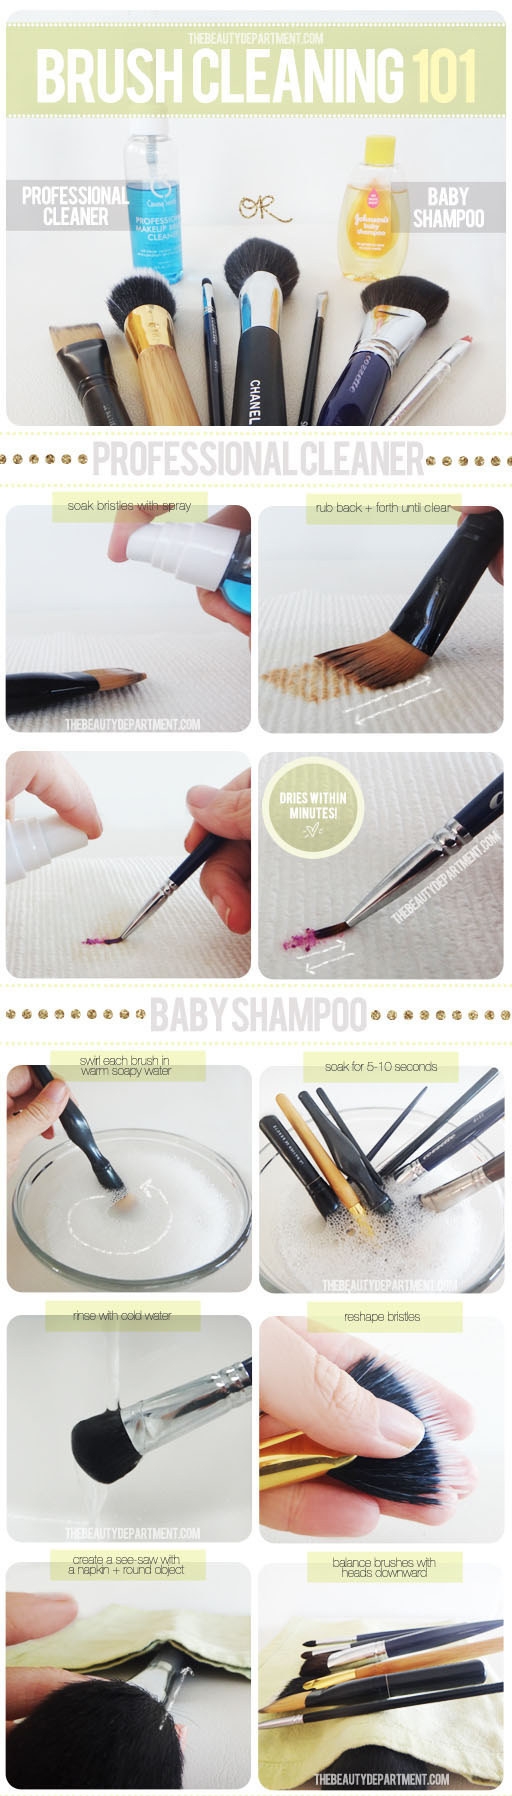 And here's how to actually clean all of those brushes.